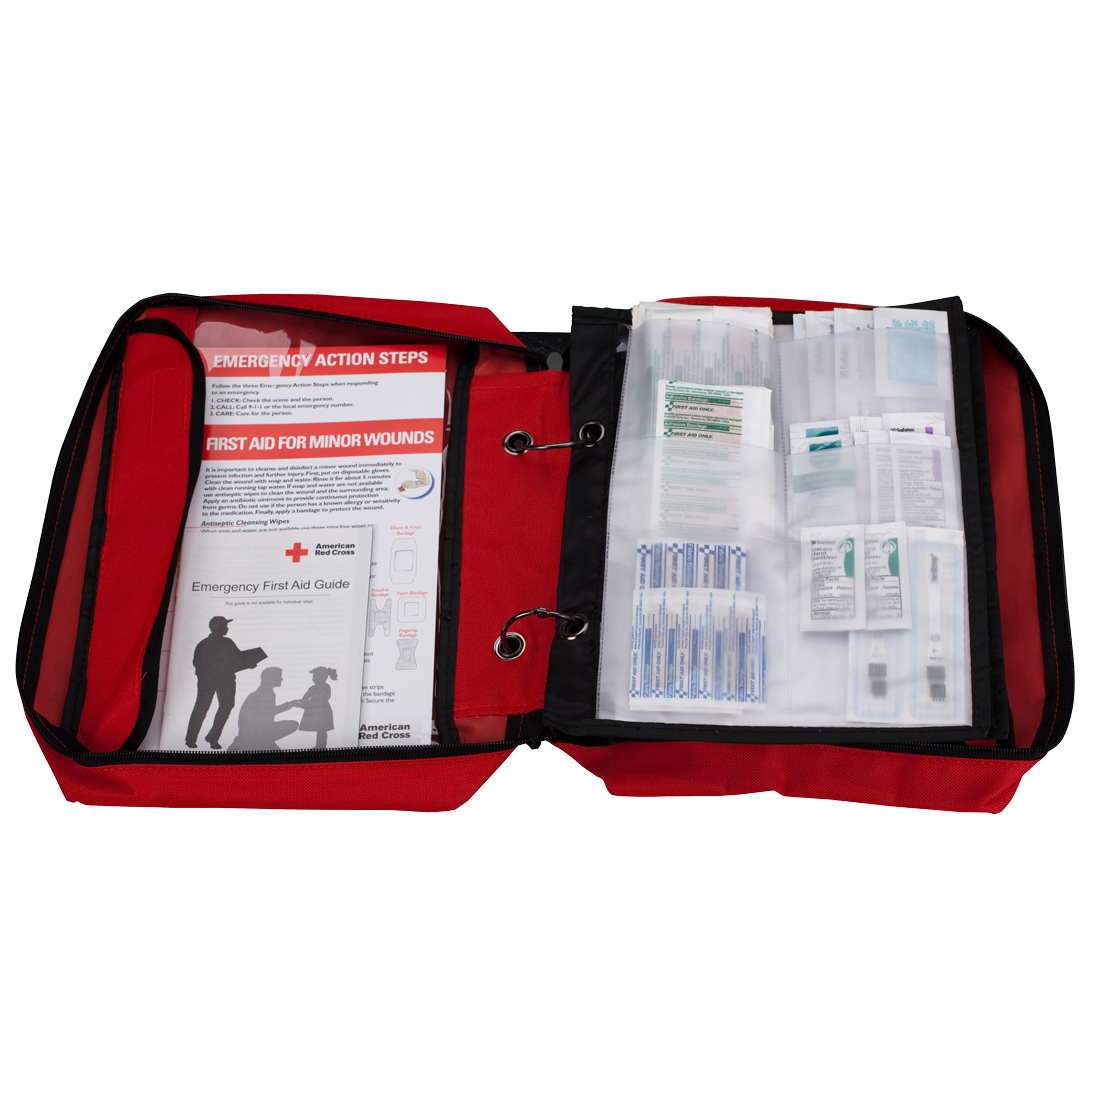 family first aid kit checklist